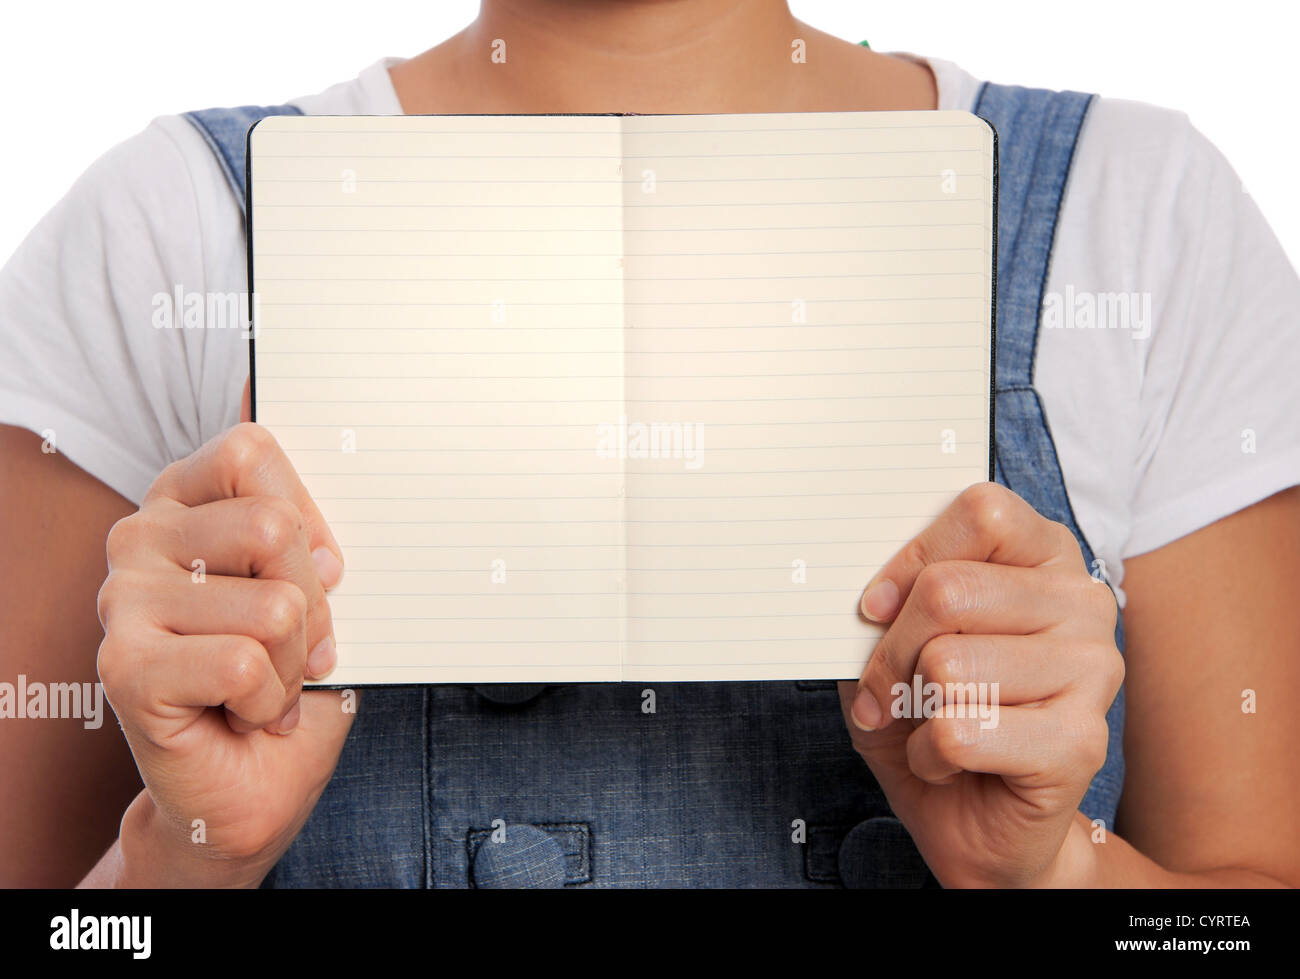 open book, blank pages Stock Photo